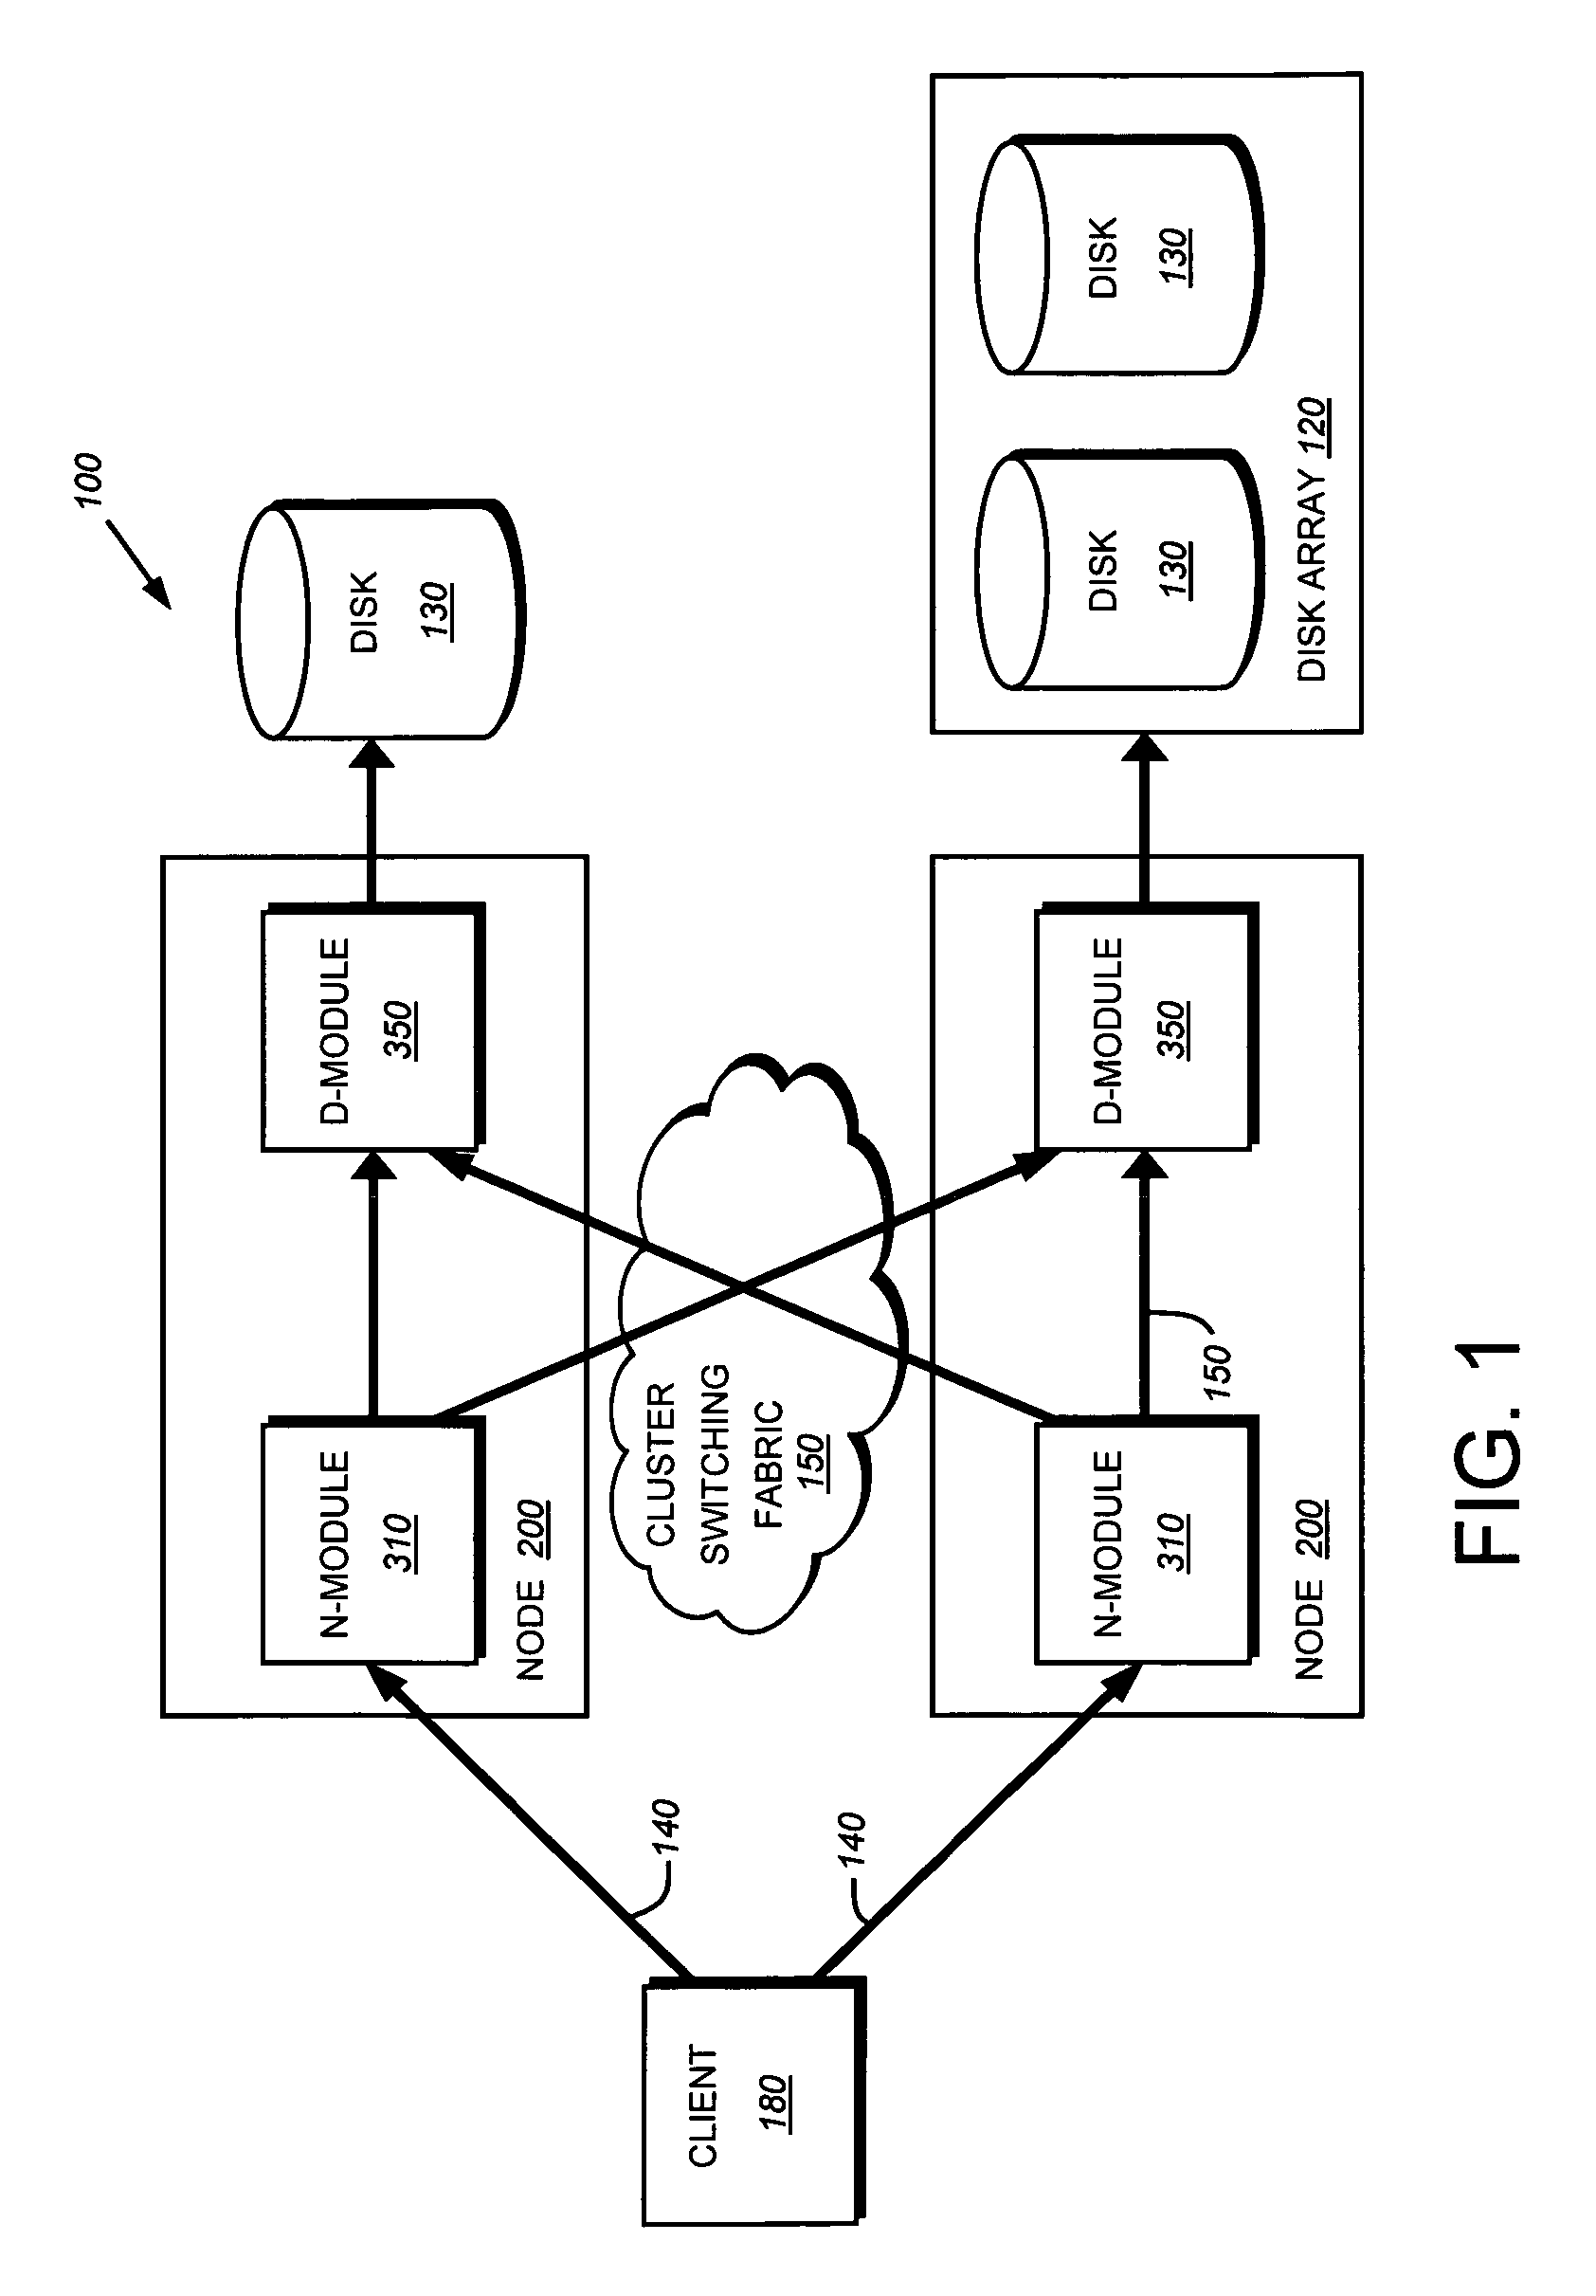 System and method for enabling de-duplication in a storage system architecture